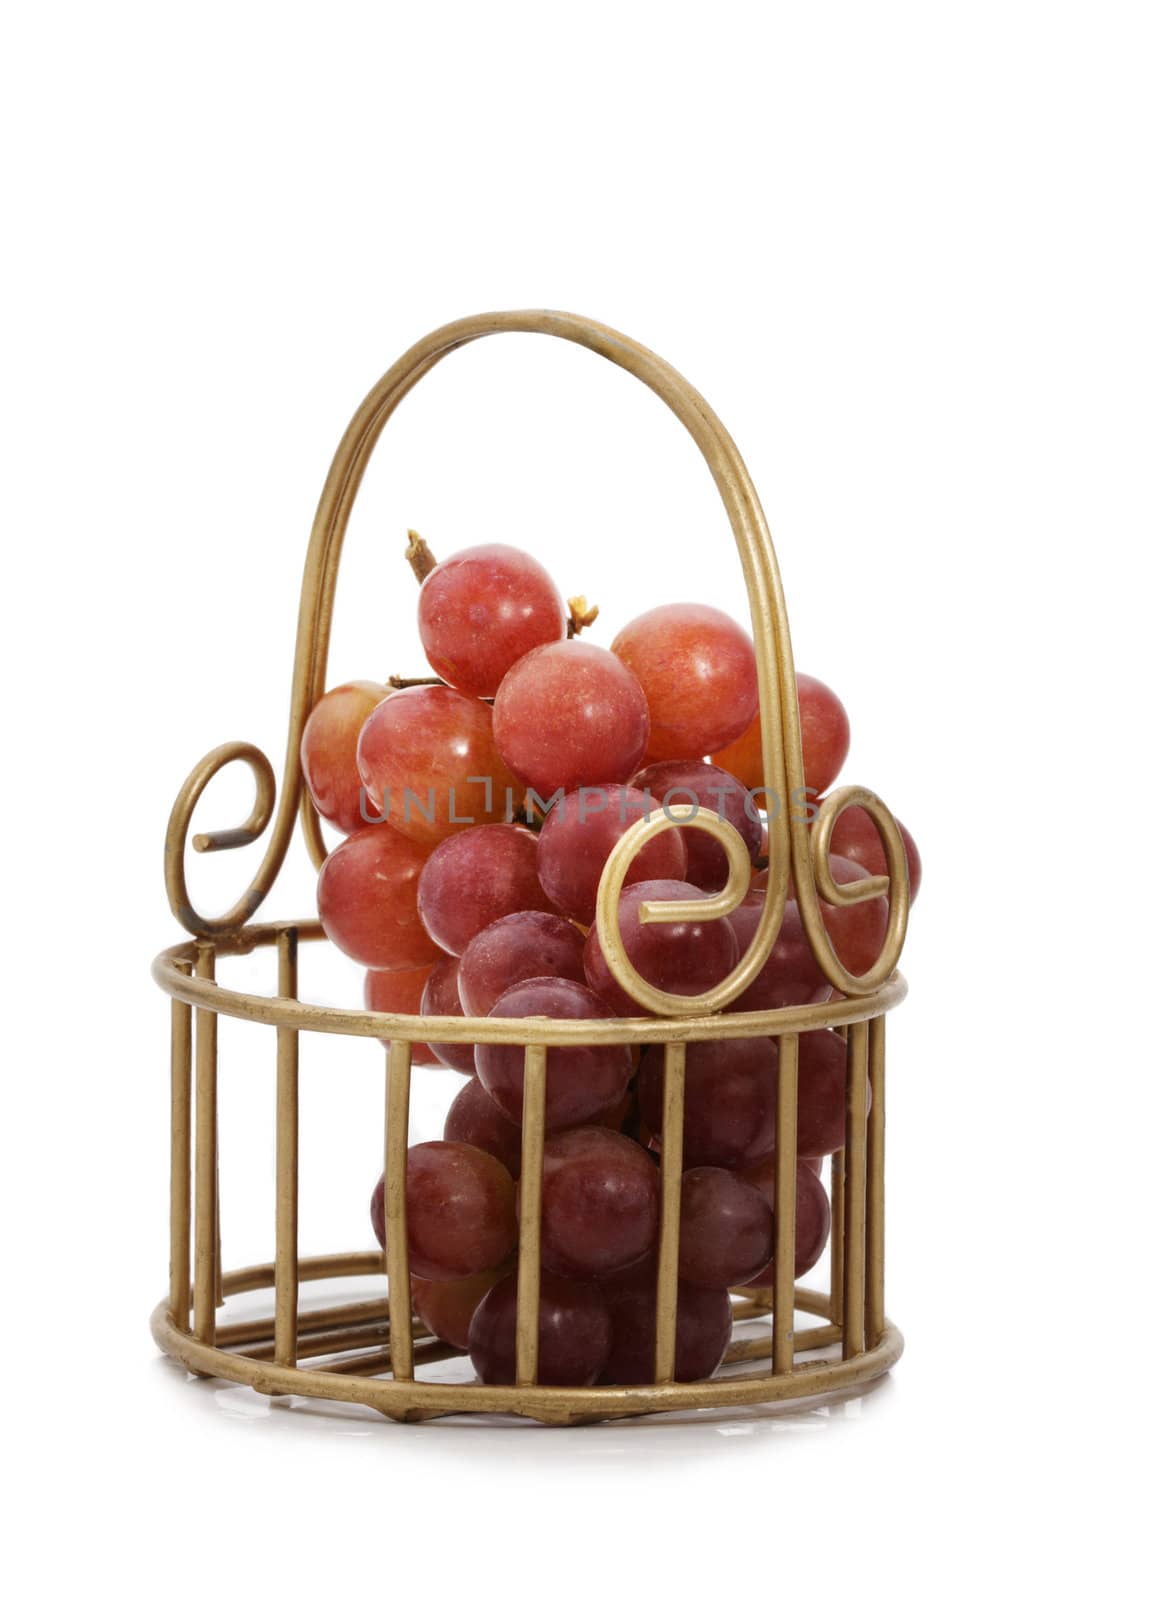 red grape in golden metal basket, white background